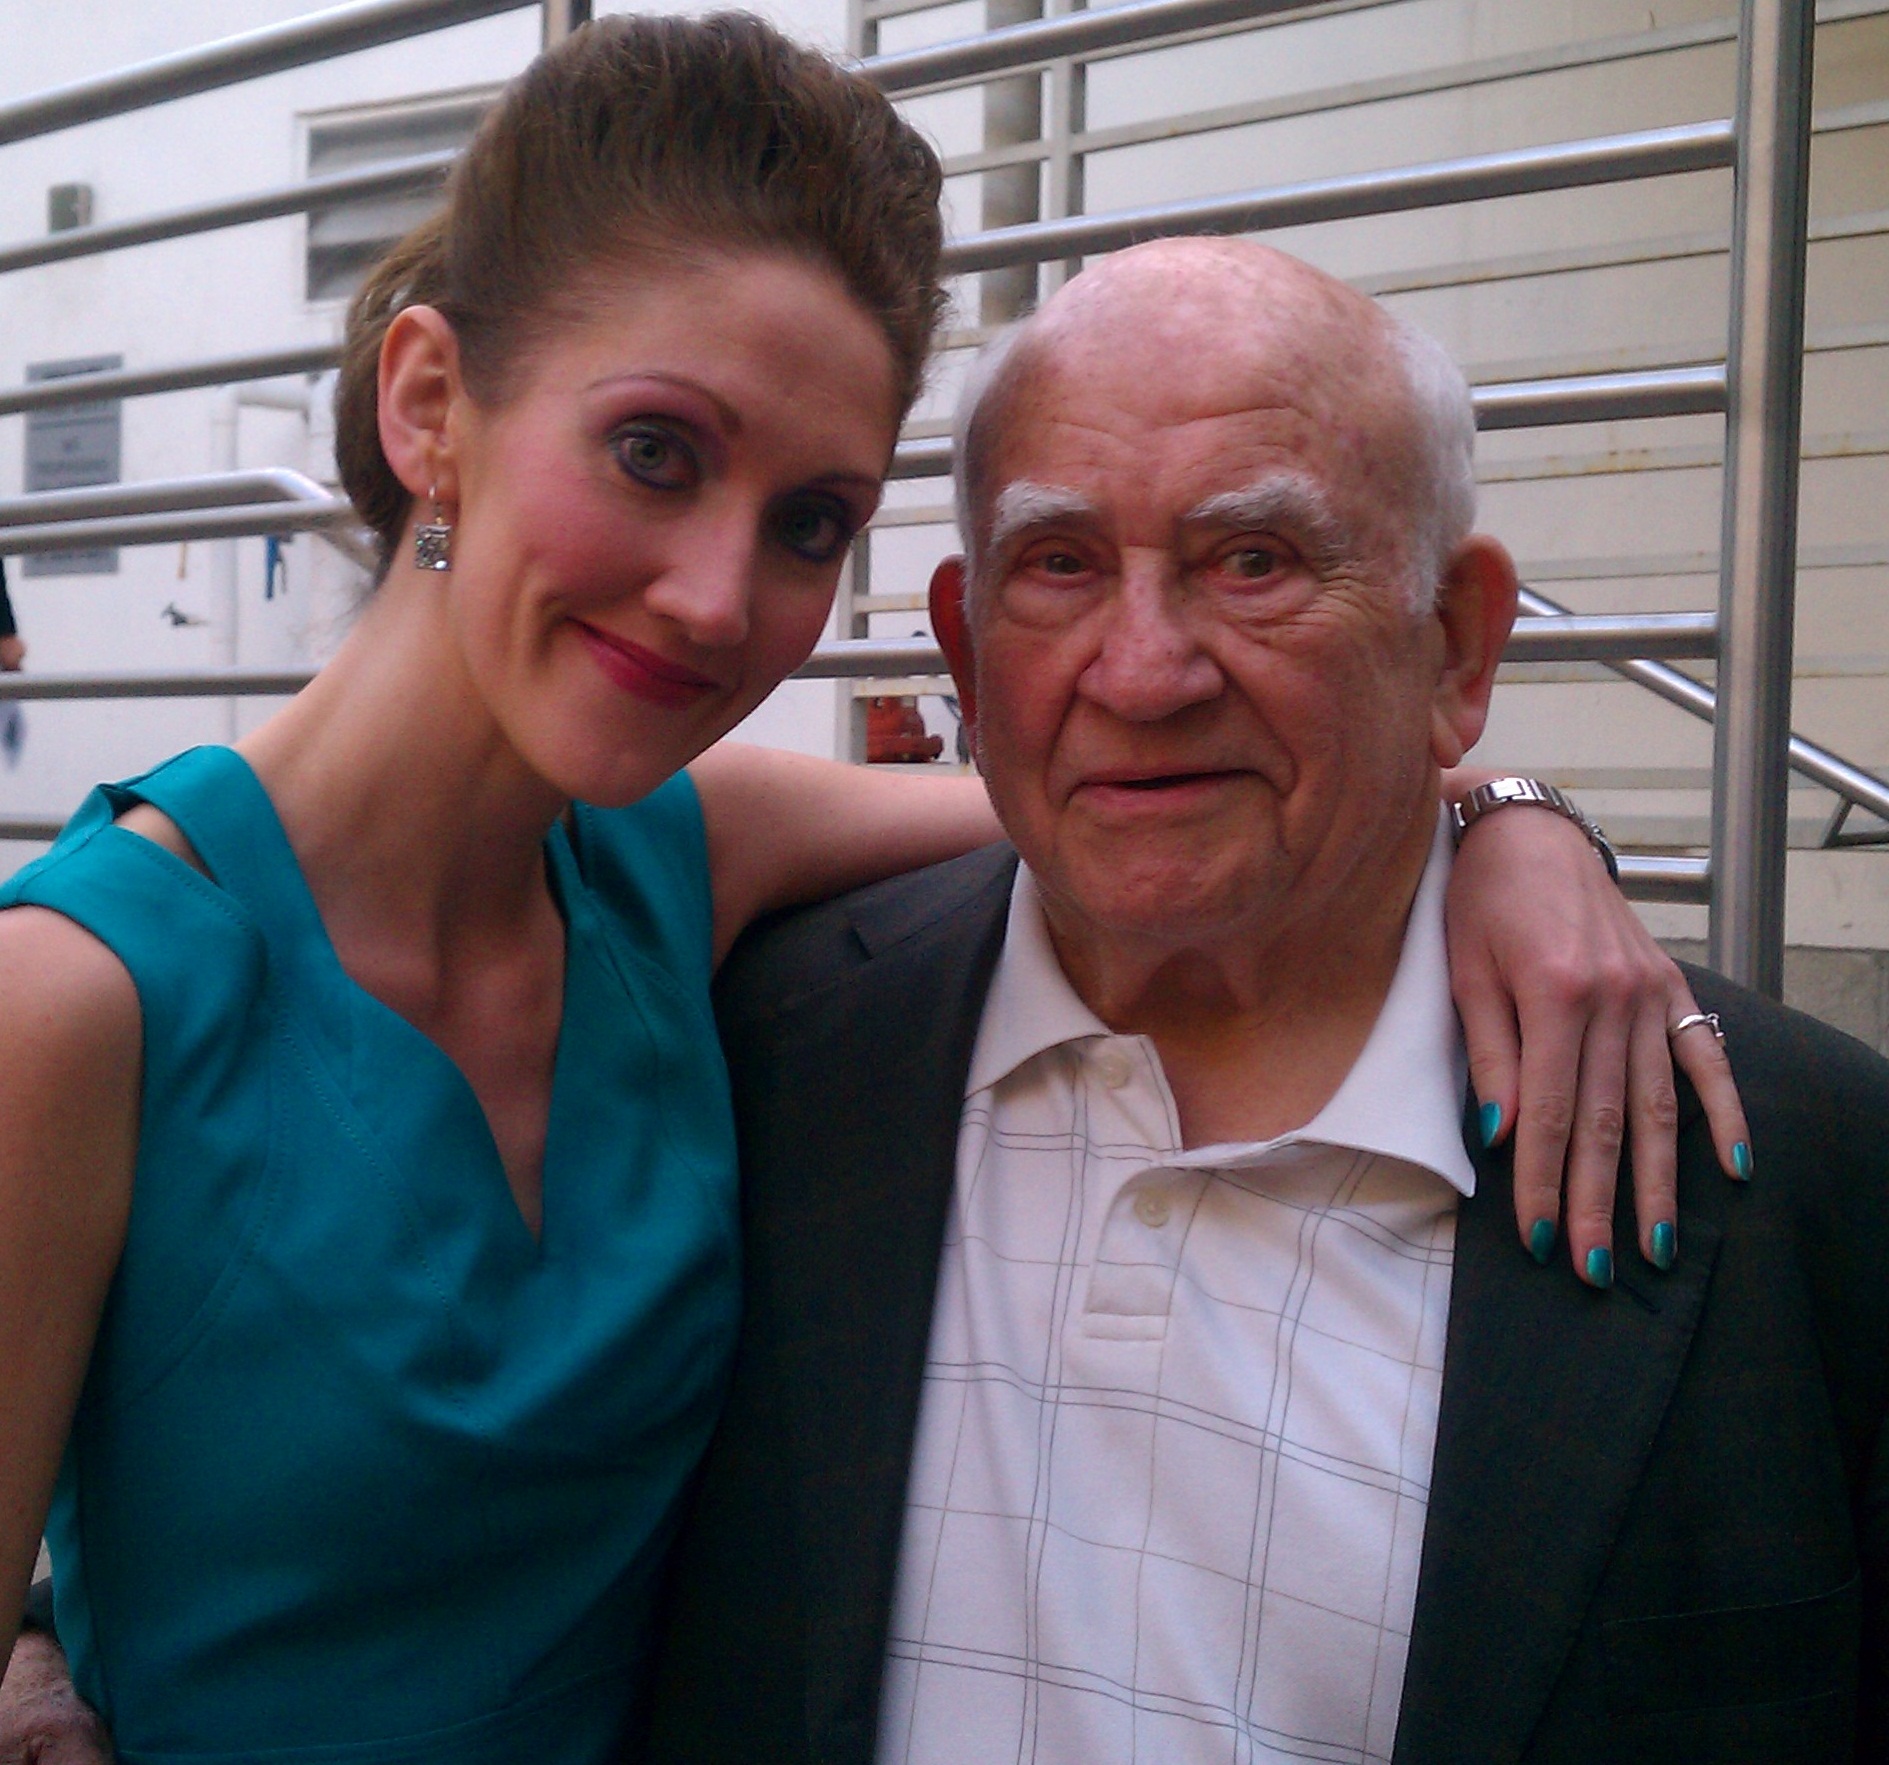 Actors Charlotte Milchard and Ed Asner at the 'Margarine Wars' Premiere reception in Hollywood.